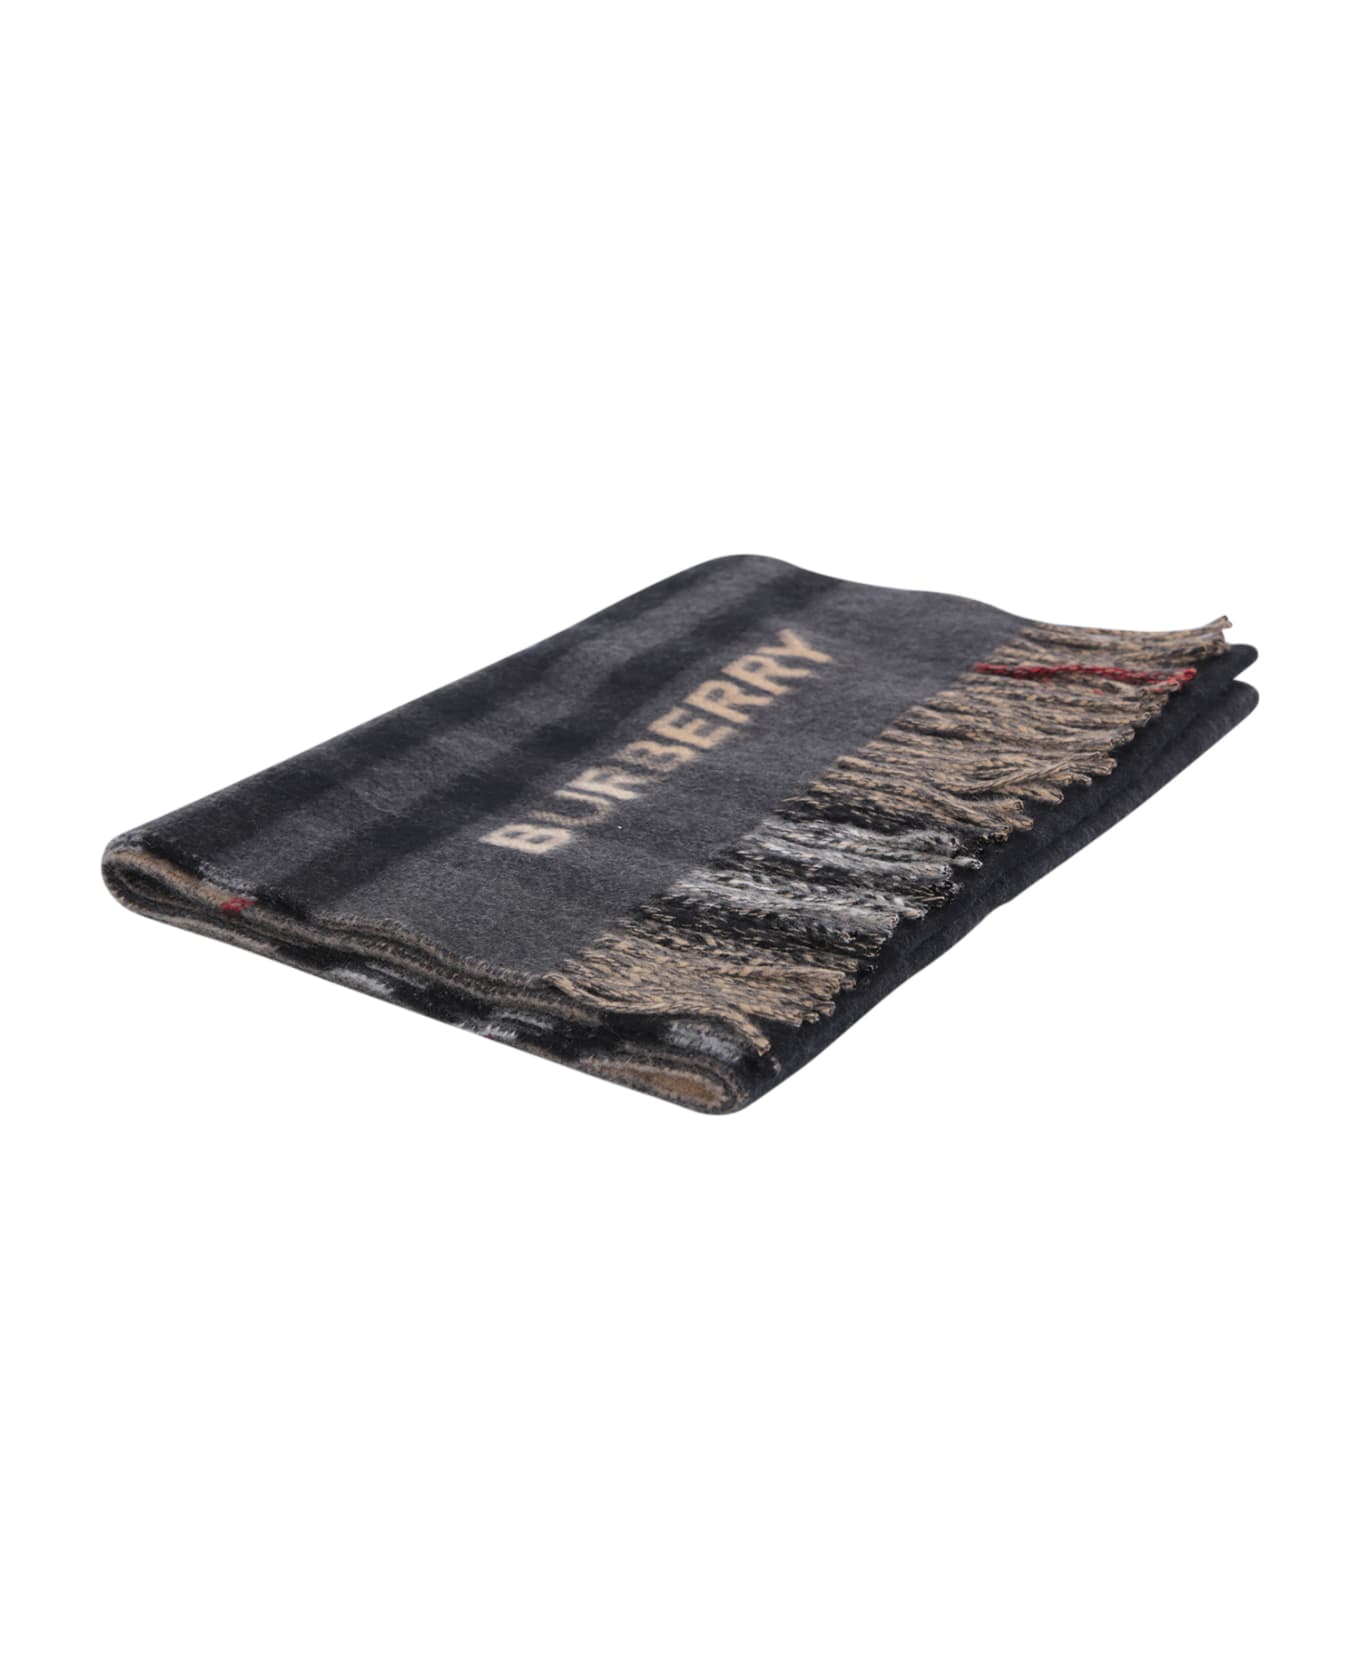 Burberry Embroidered Cashmere Scarf - Beige, black